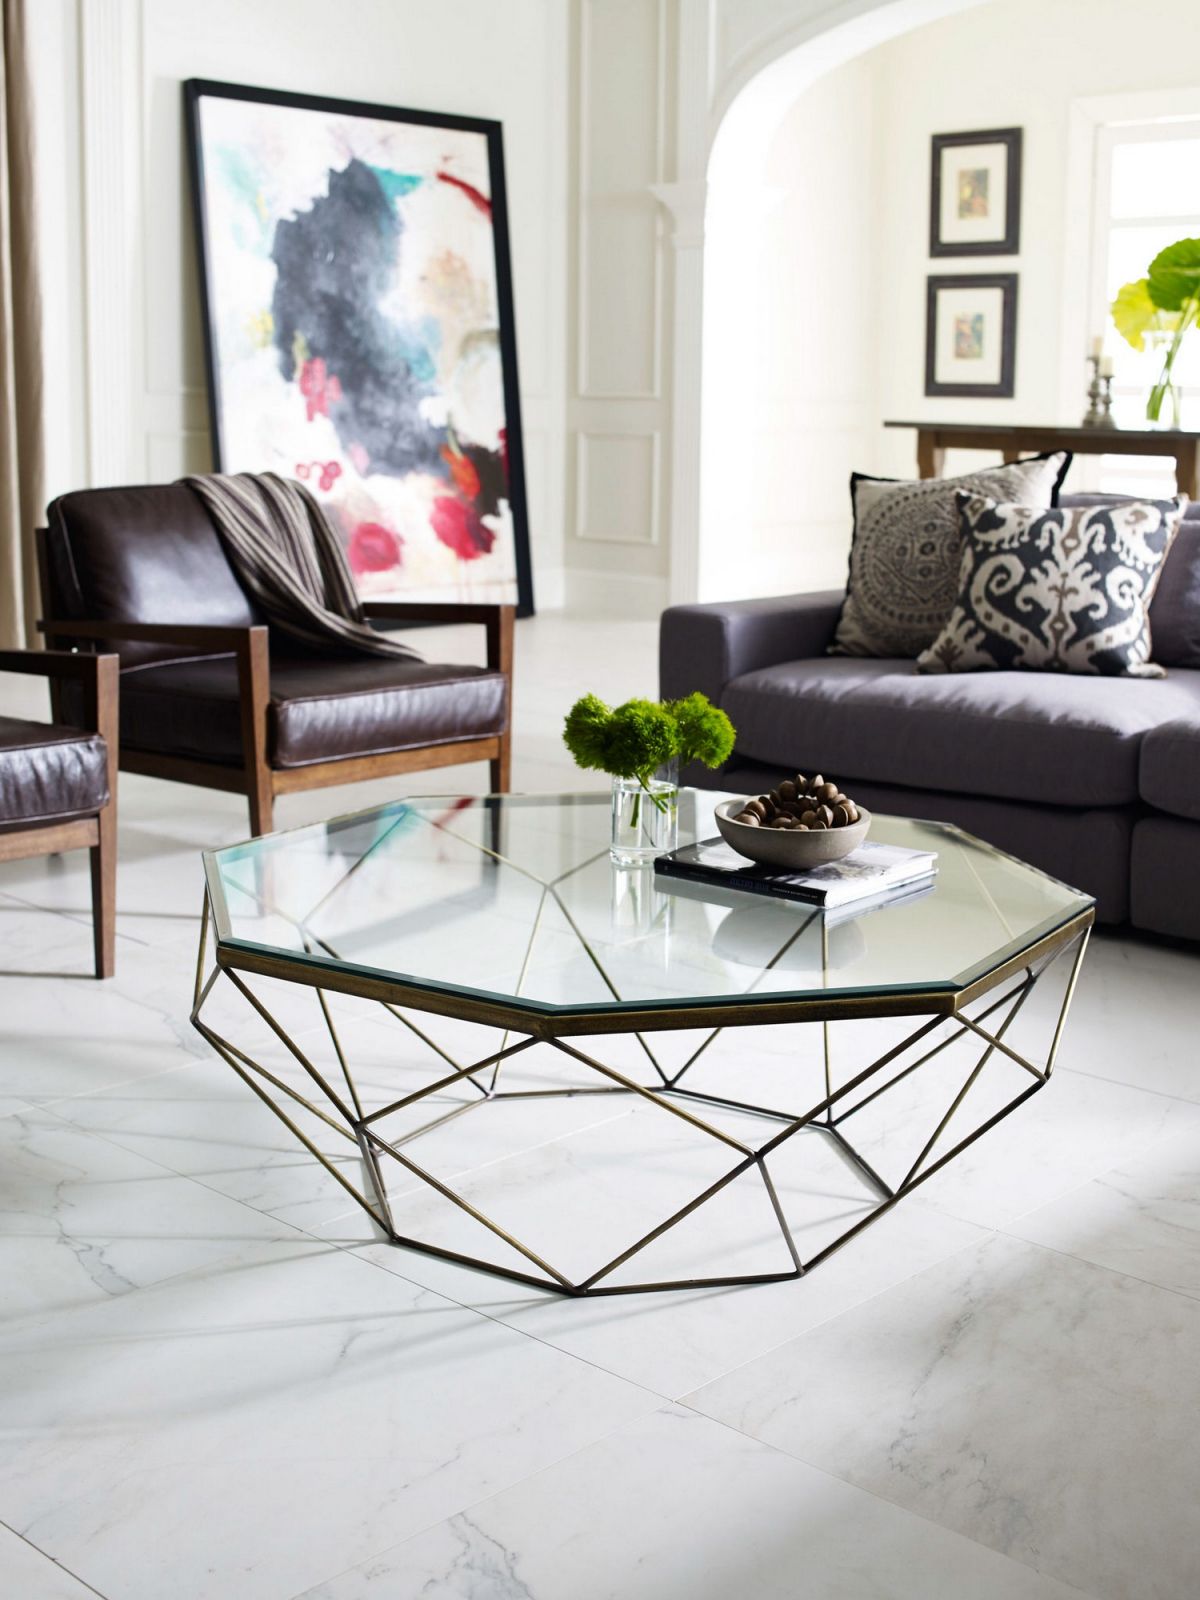 Geometric Coffee Tables For Recent Arvid Geometric Coffee Table Antique Brass – Coffee Tables (View 3 of 20)